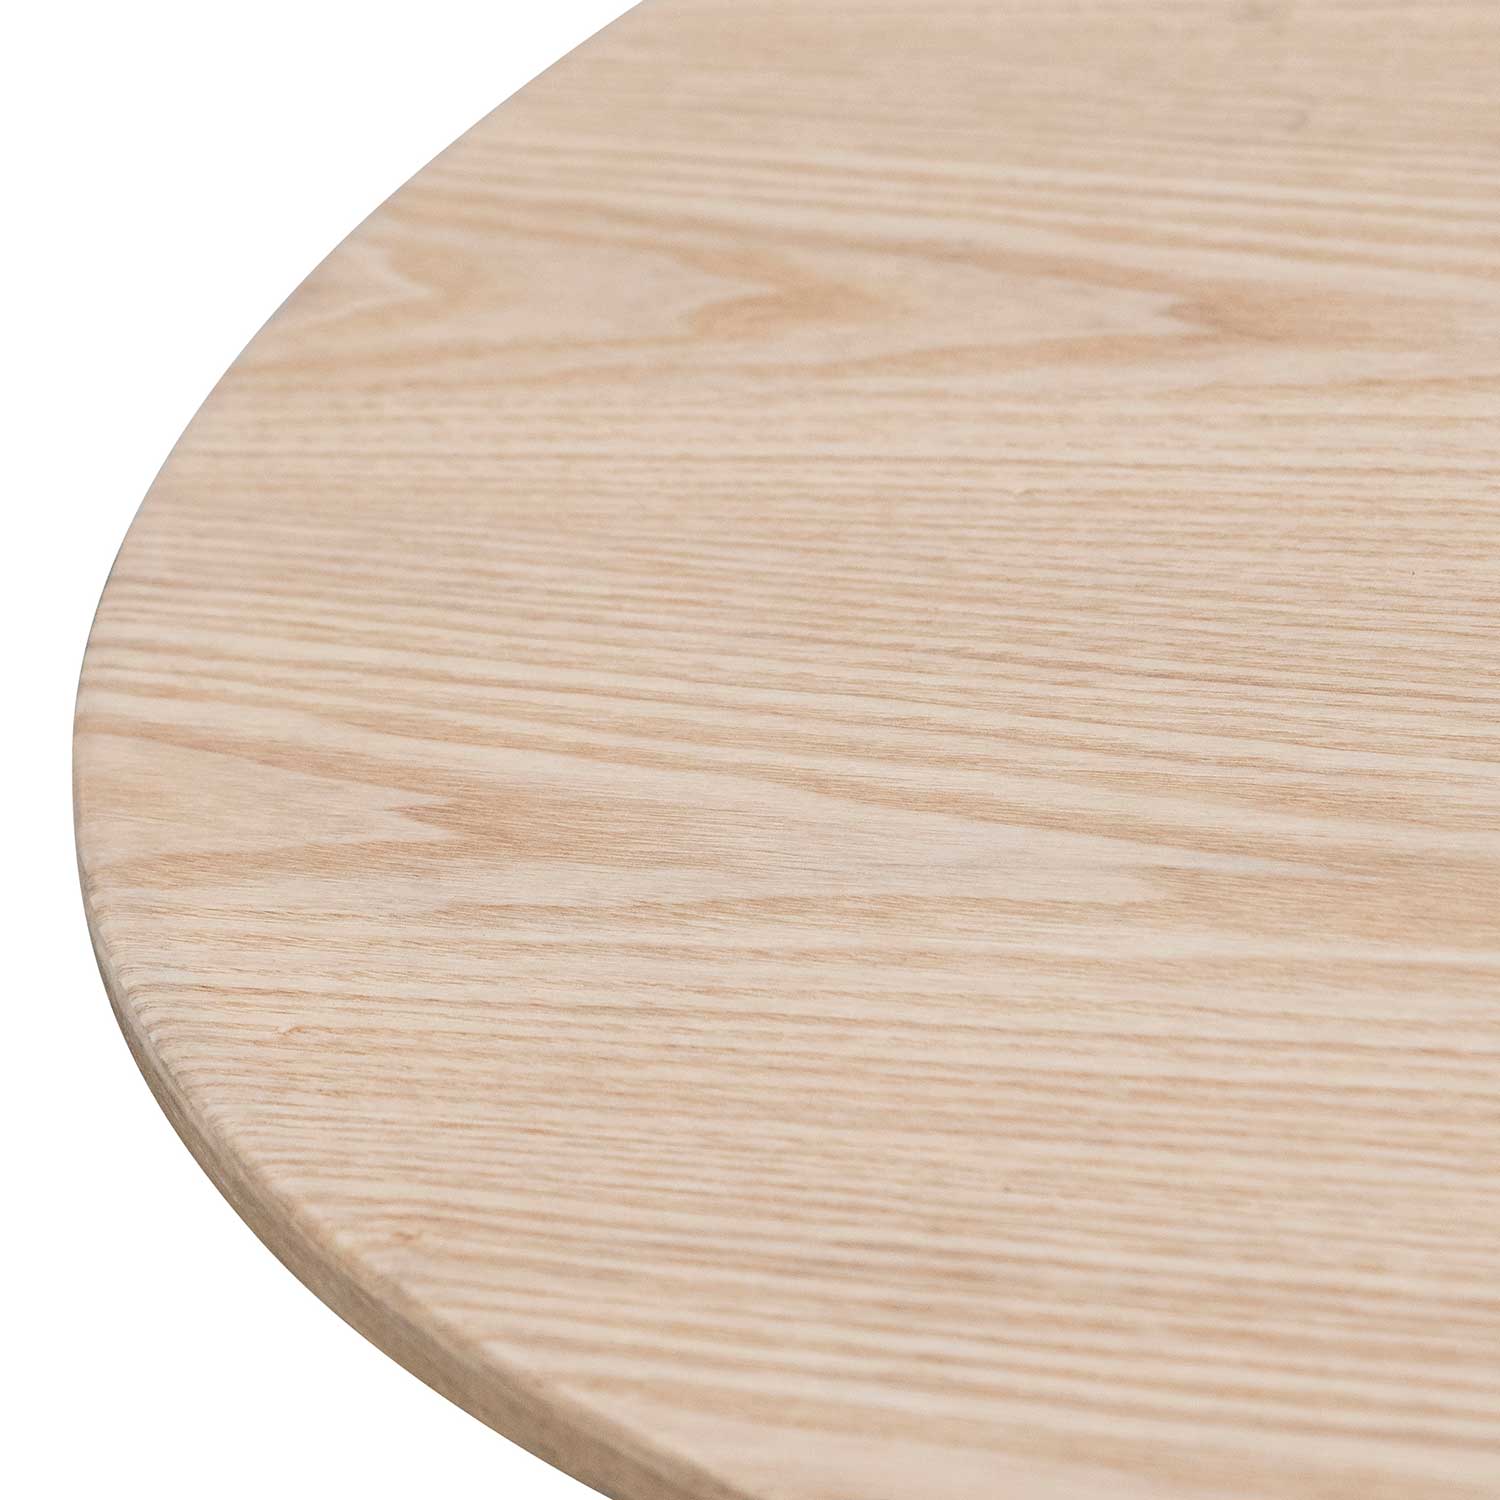 Nilo Round Wooden Dining Table - Natural Top and Black Base - Dining Tables